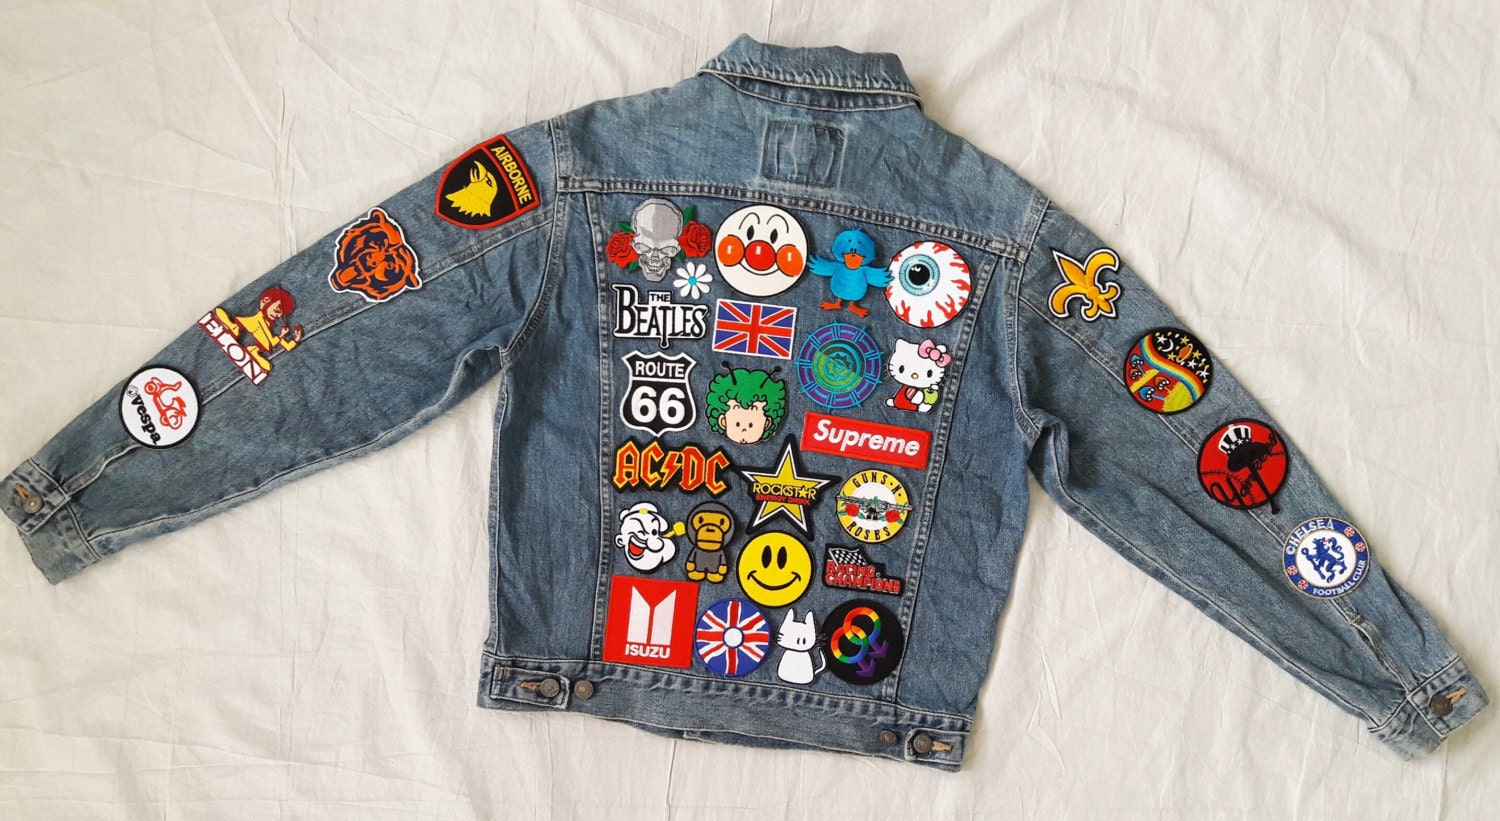 Patched Denim / Hand Reworked Vintage Jean Jacket with Patches